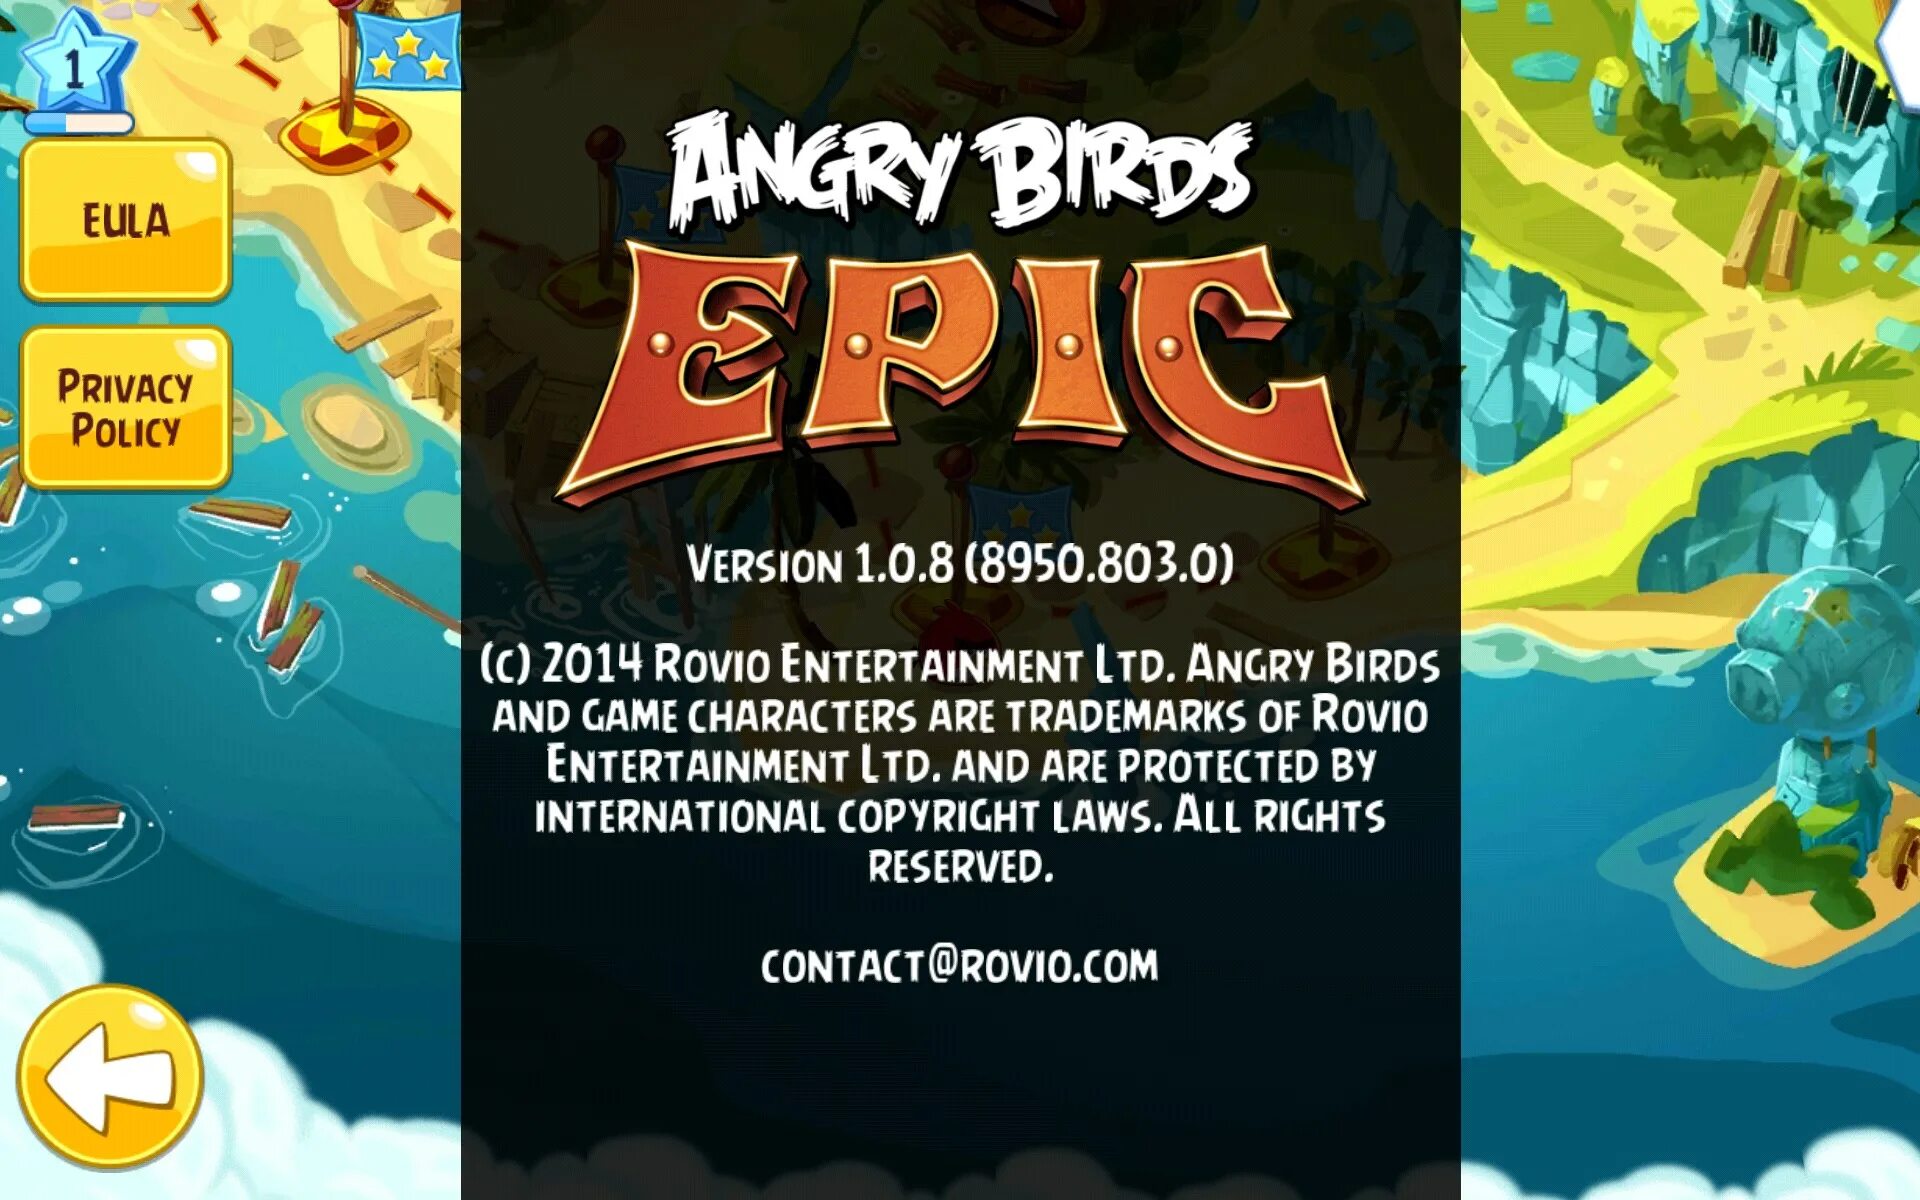 Angry Birds Epic. Angry Birds Epic RPG игры. Коды Angry Birds Epic. Angry Birds Epic 11 андроид.